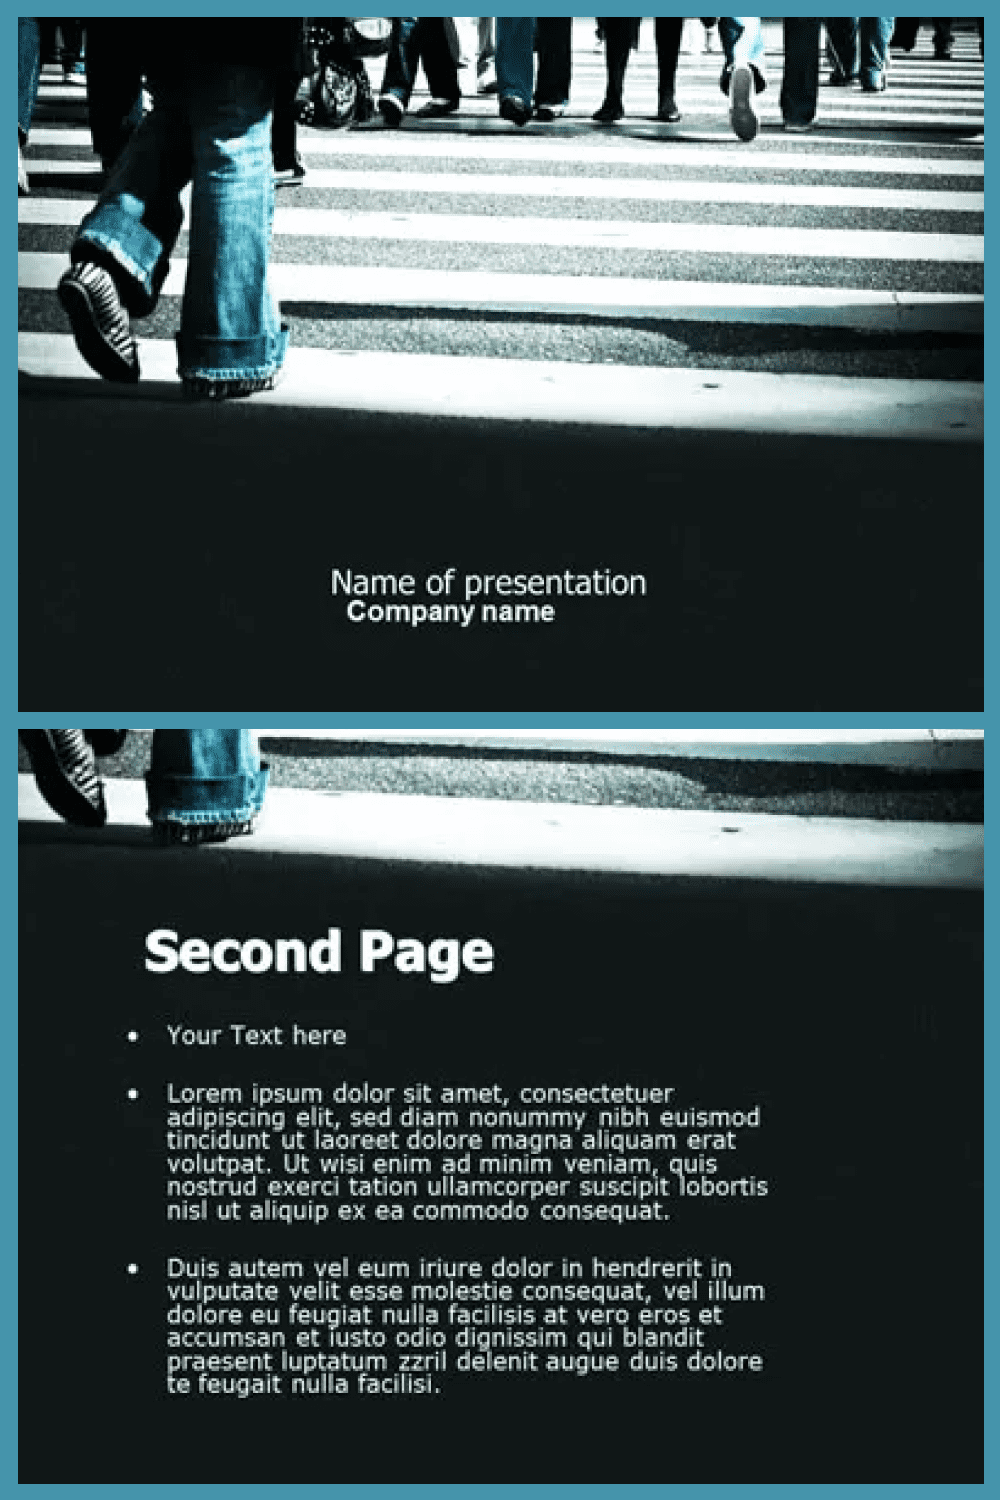 Social psychology powerpoint template.